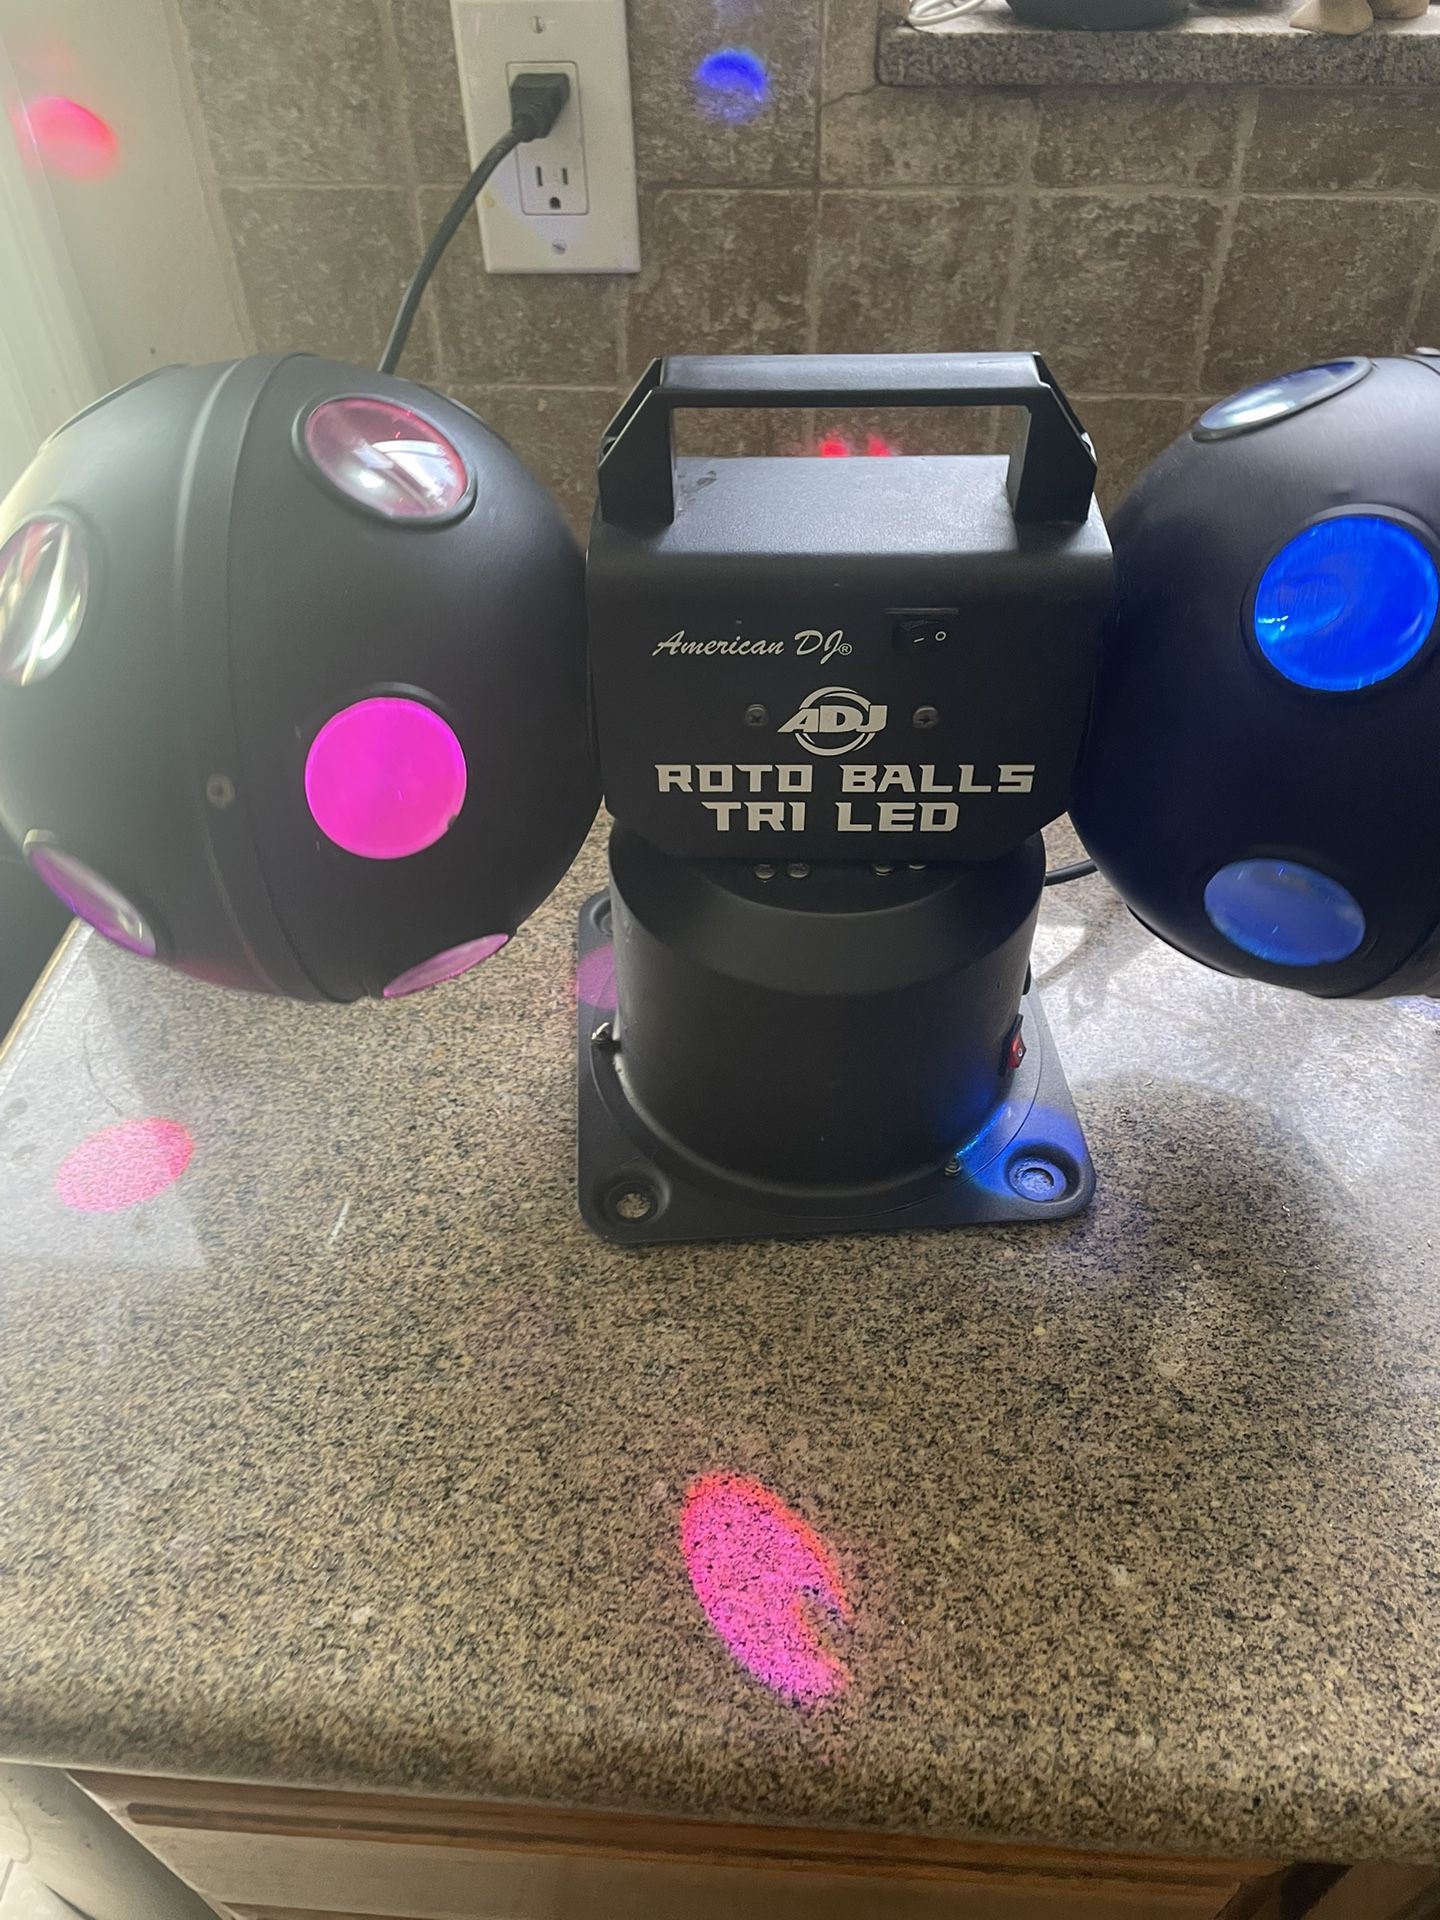 Professional Quality American DJ ROTO BALLS TRI LED Dual Rotating Ball With  60 Sound Activated Beams for Sale in Santa Ana, CA - OfferUp